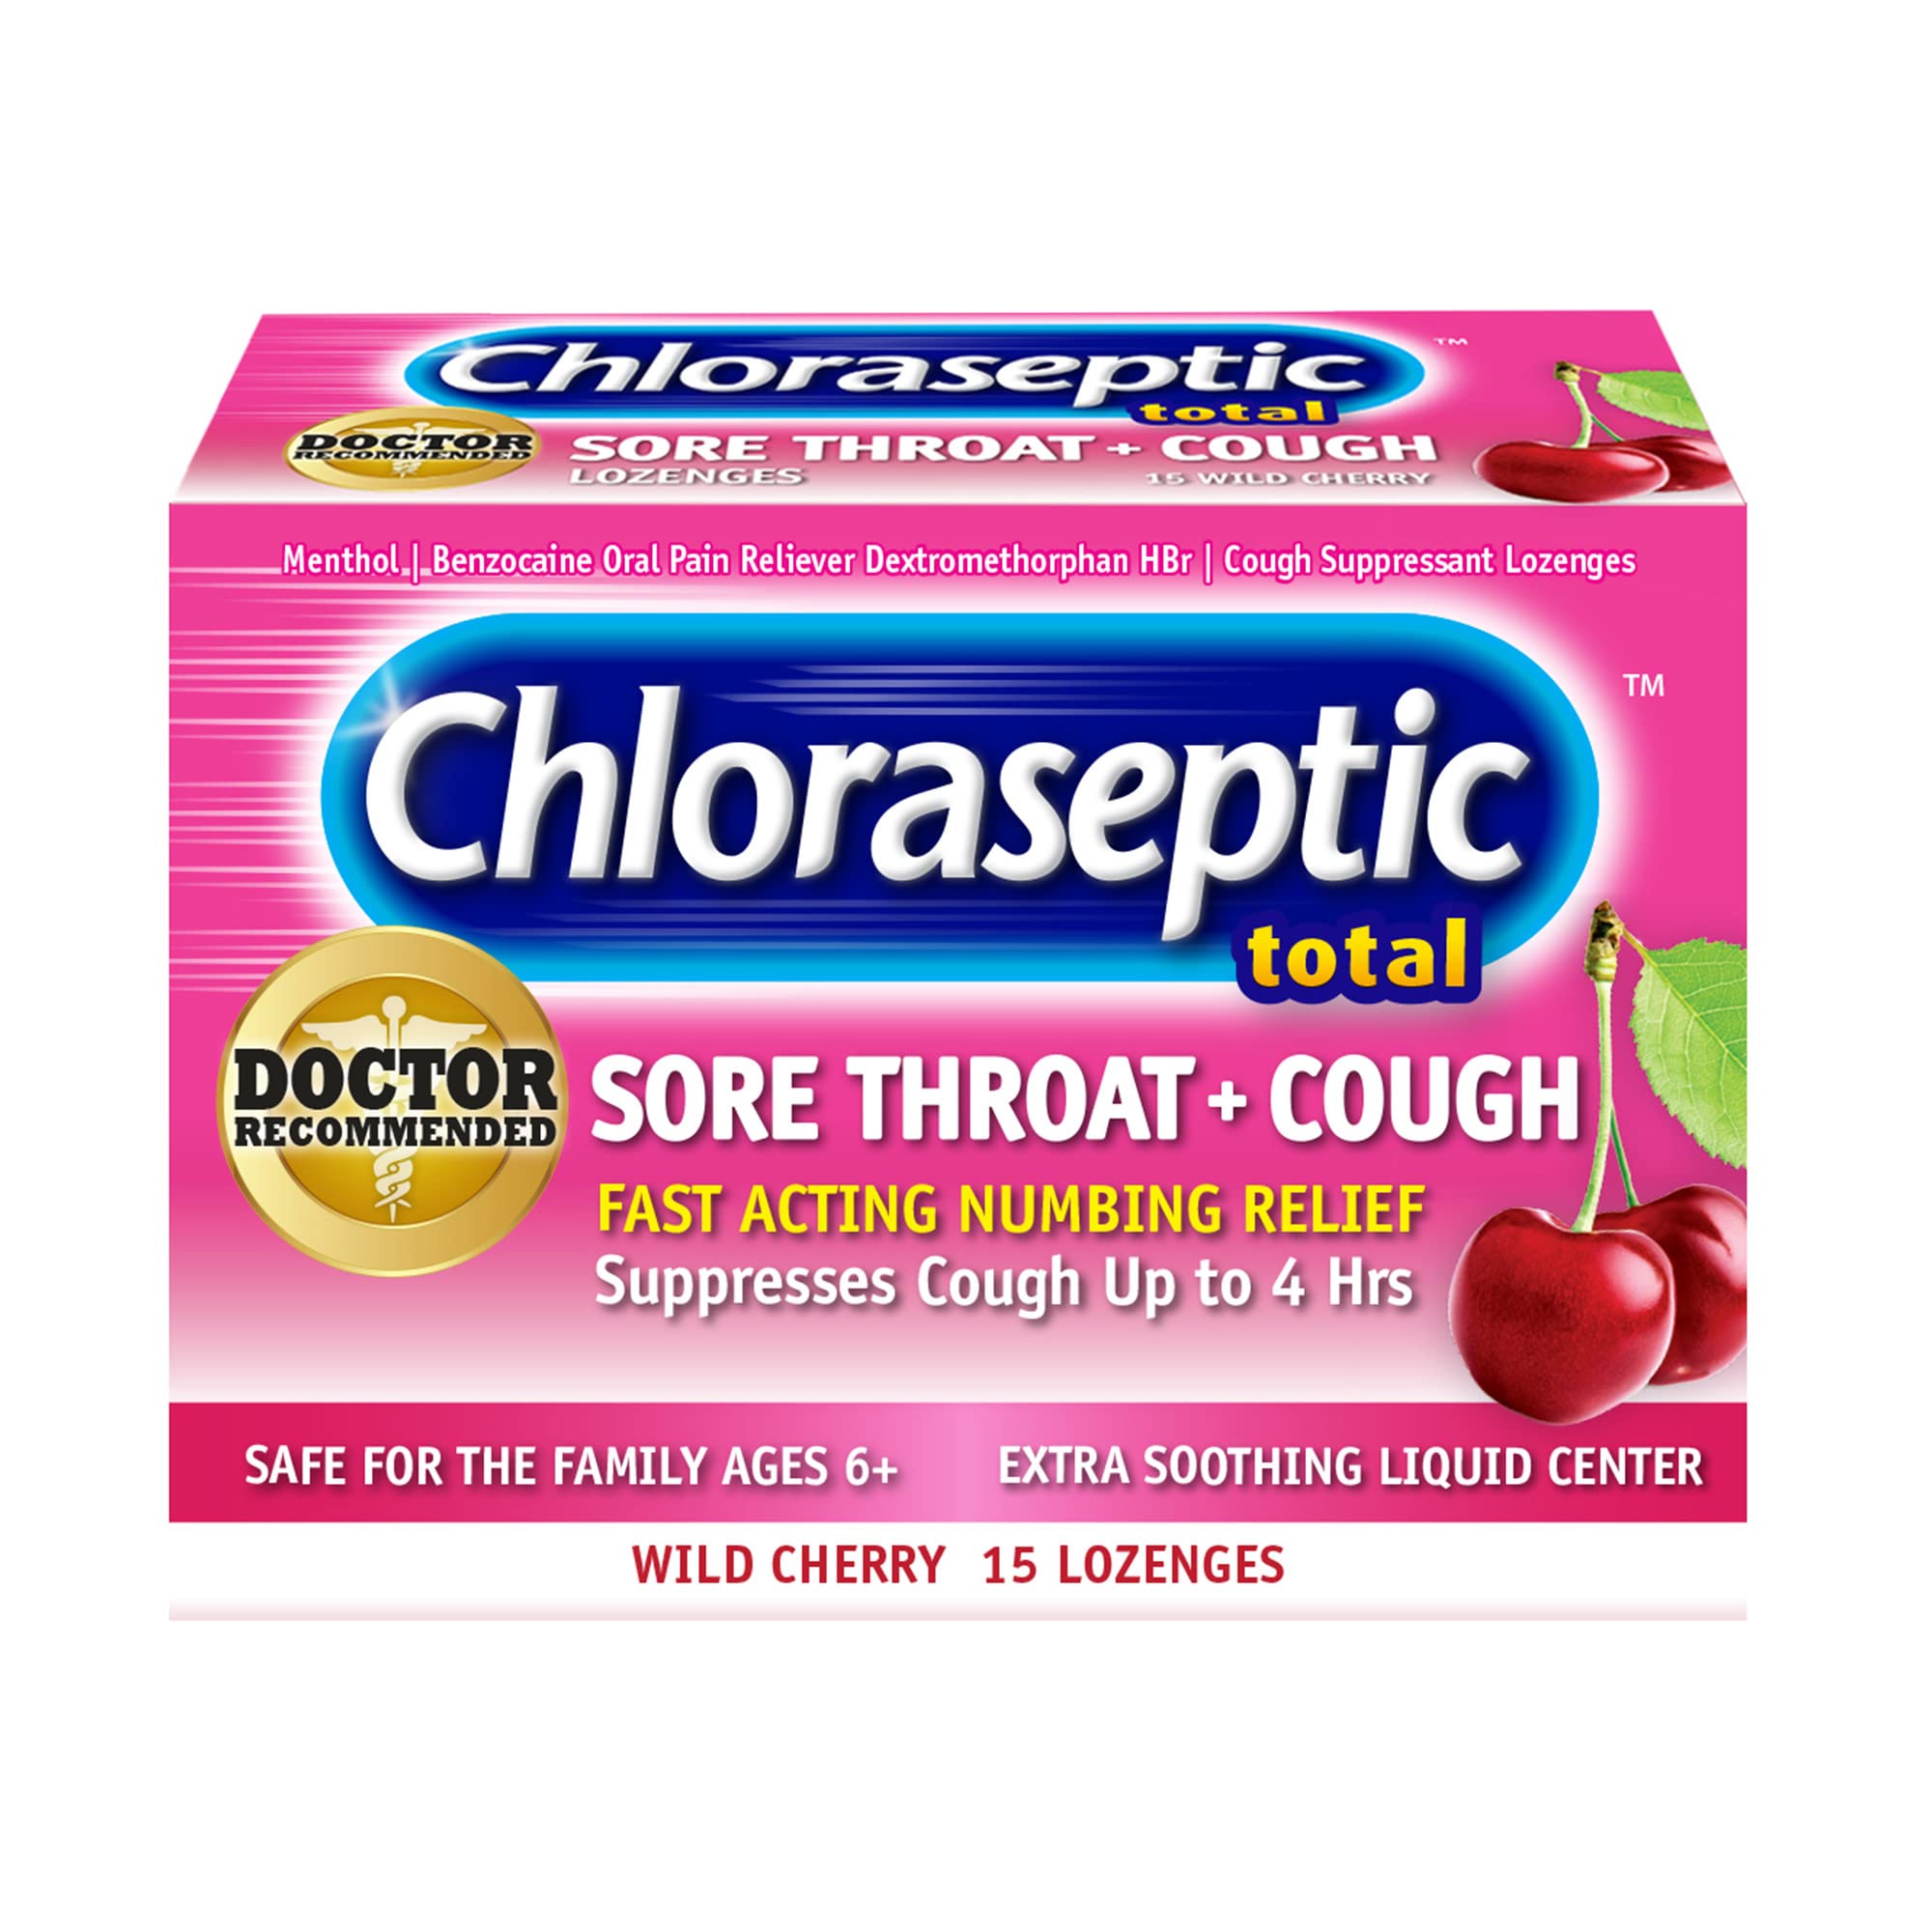 Chloraseptic Total Sore Throat + Cough Lozenges, Wild Cherry, 15 Count, 1 Pack